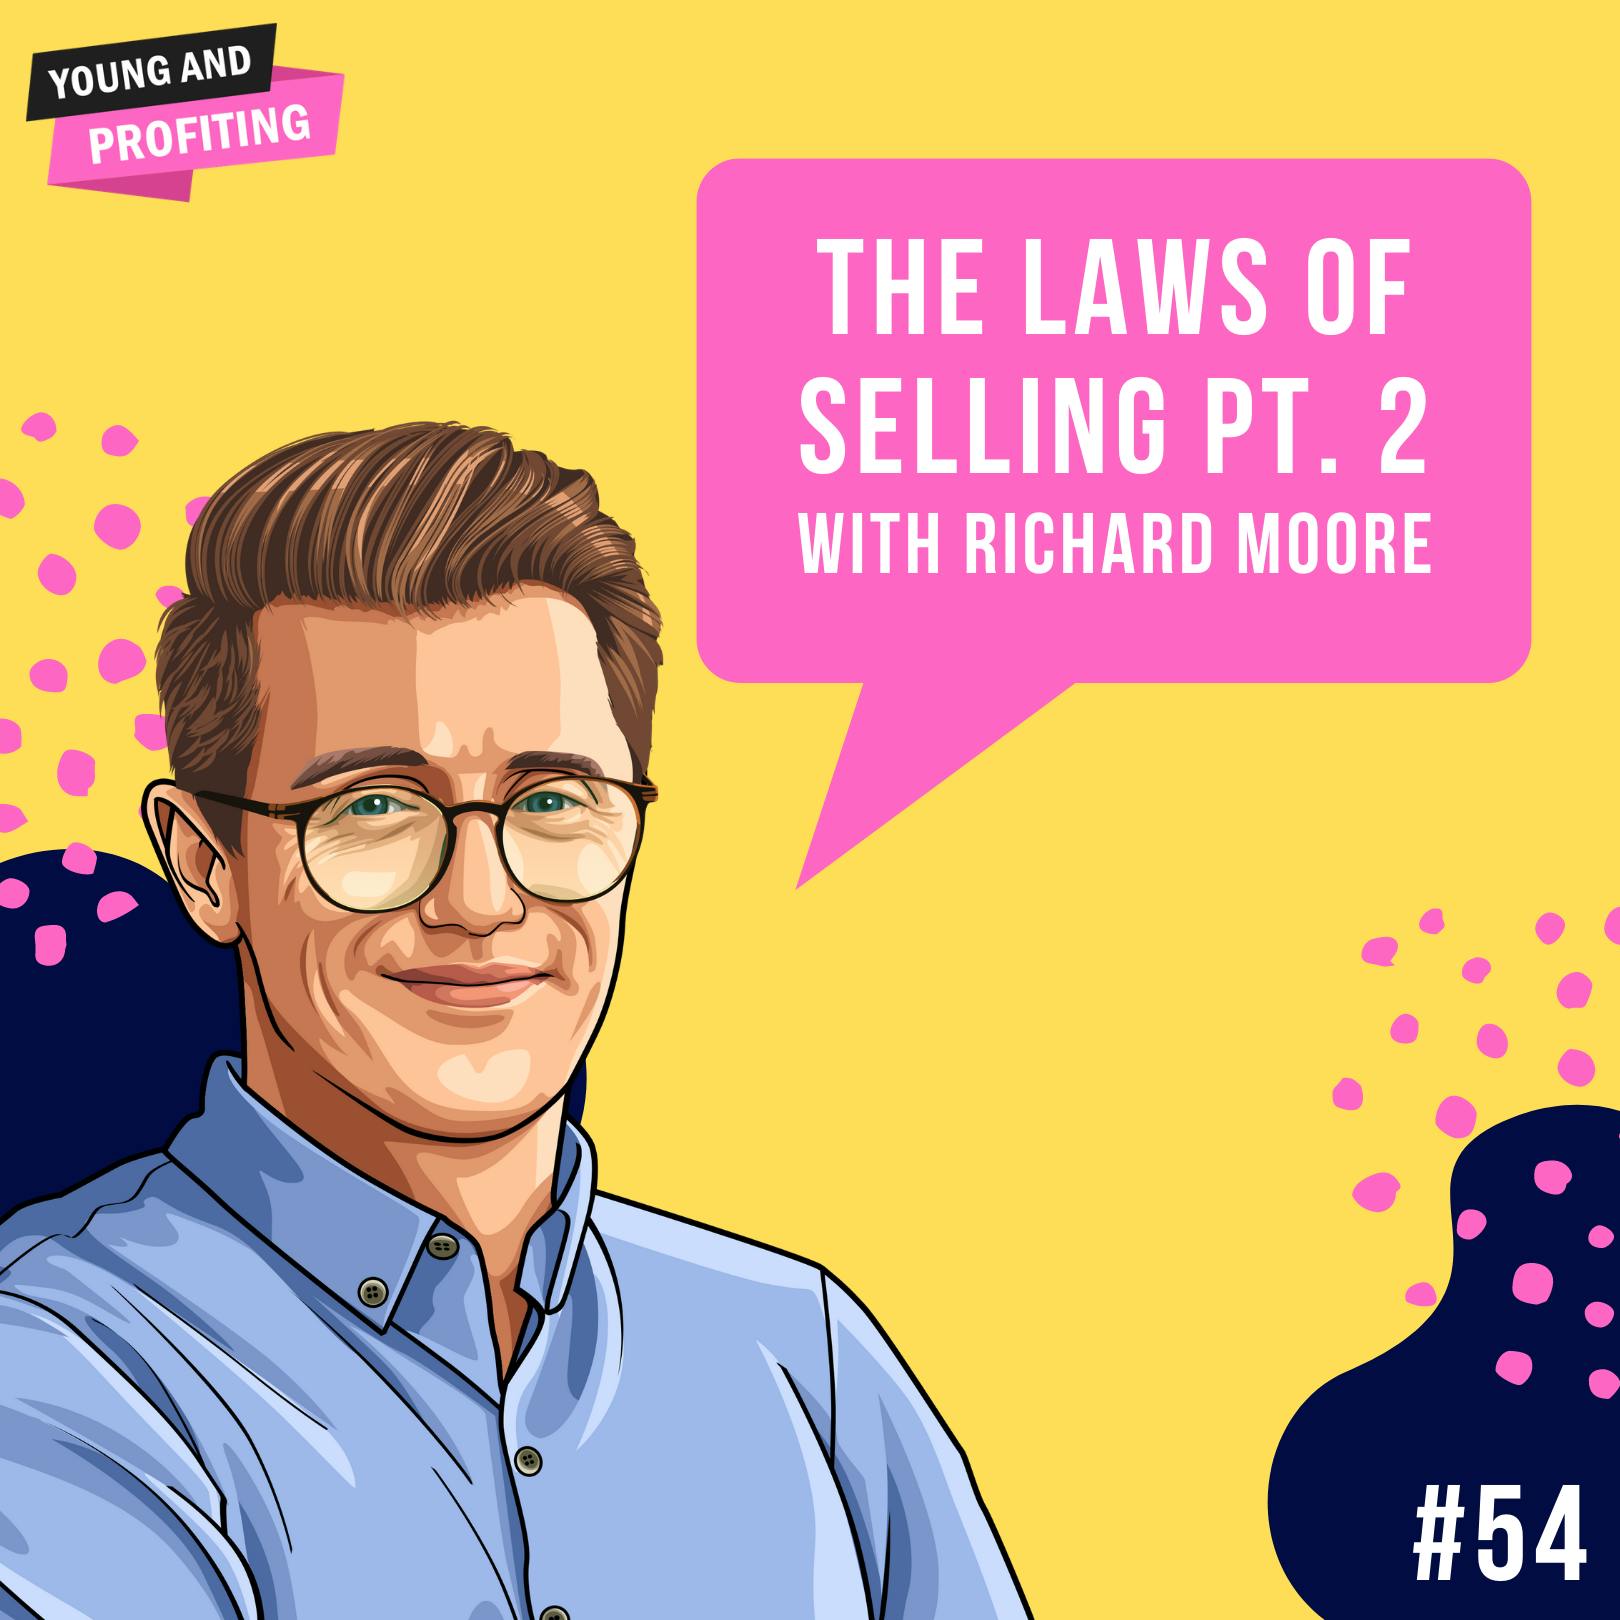 Richard Moore [Part 2]: The Laws of Selling | E54 by Hala Taha | YAP Media Network